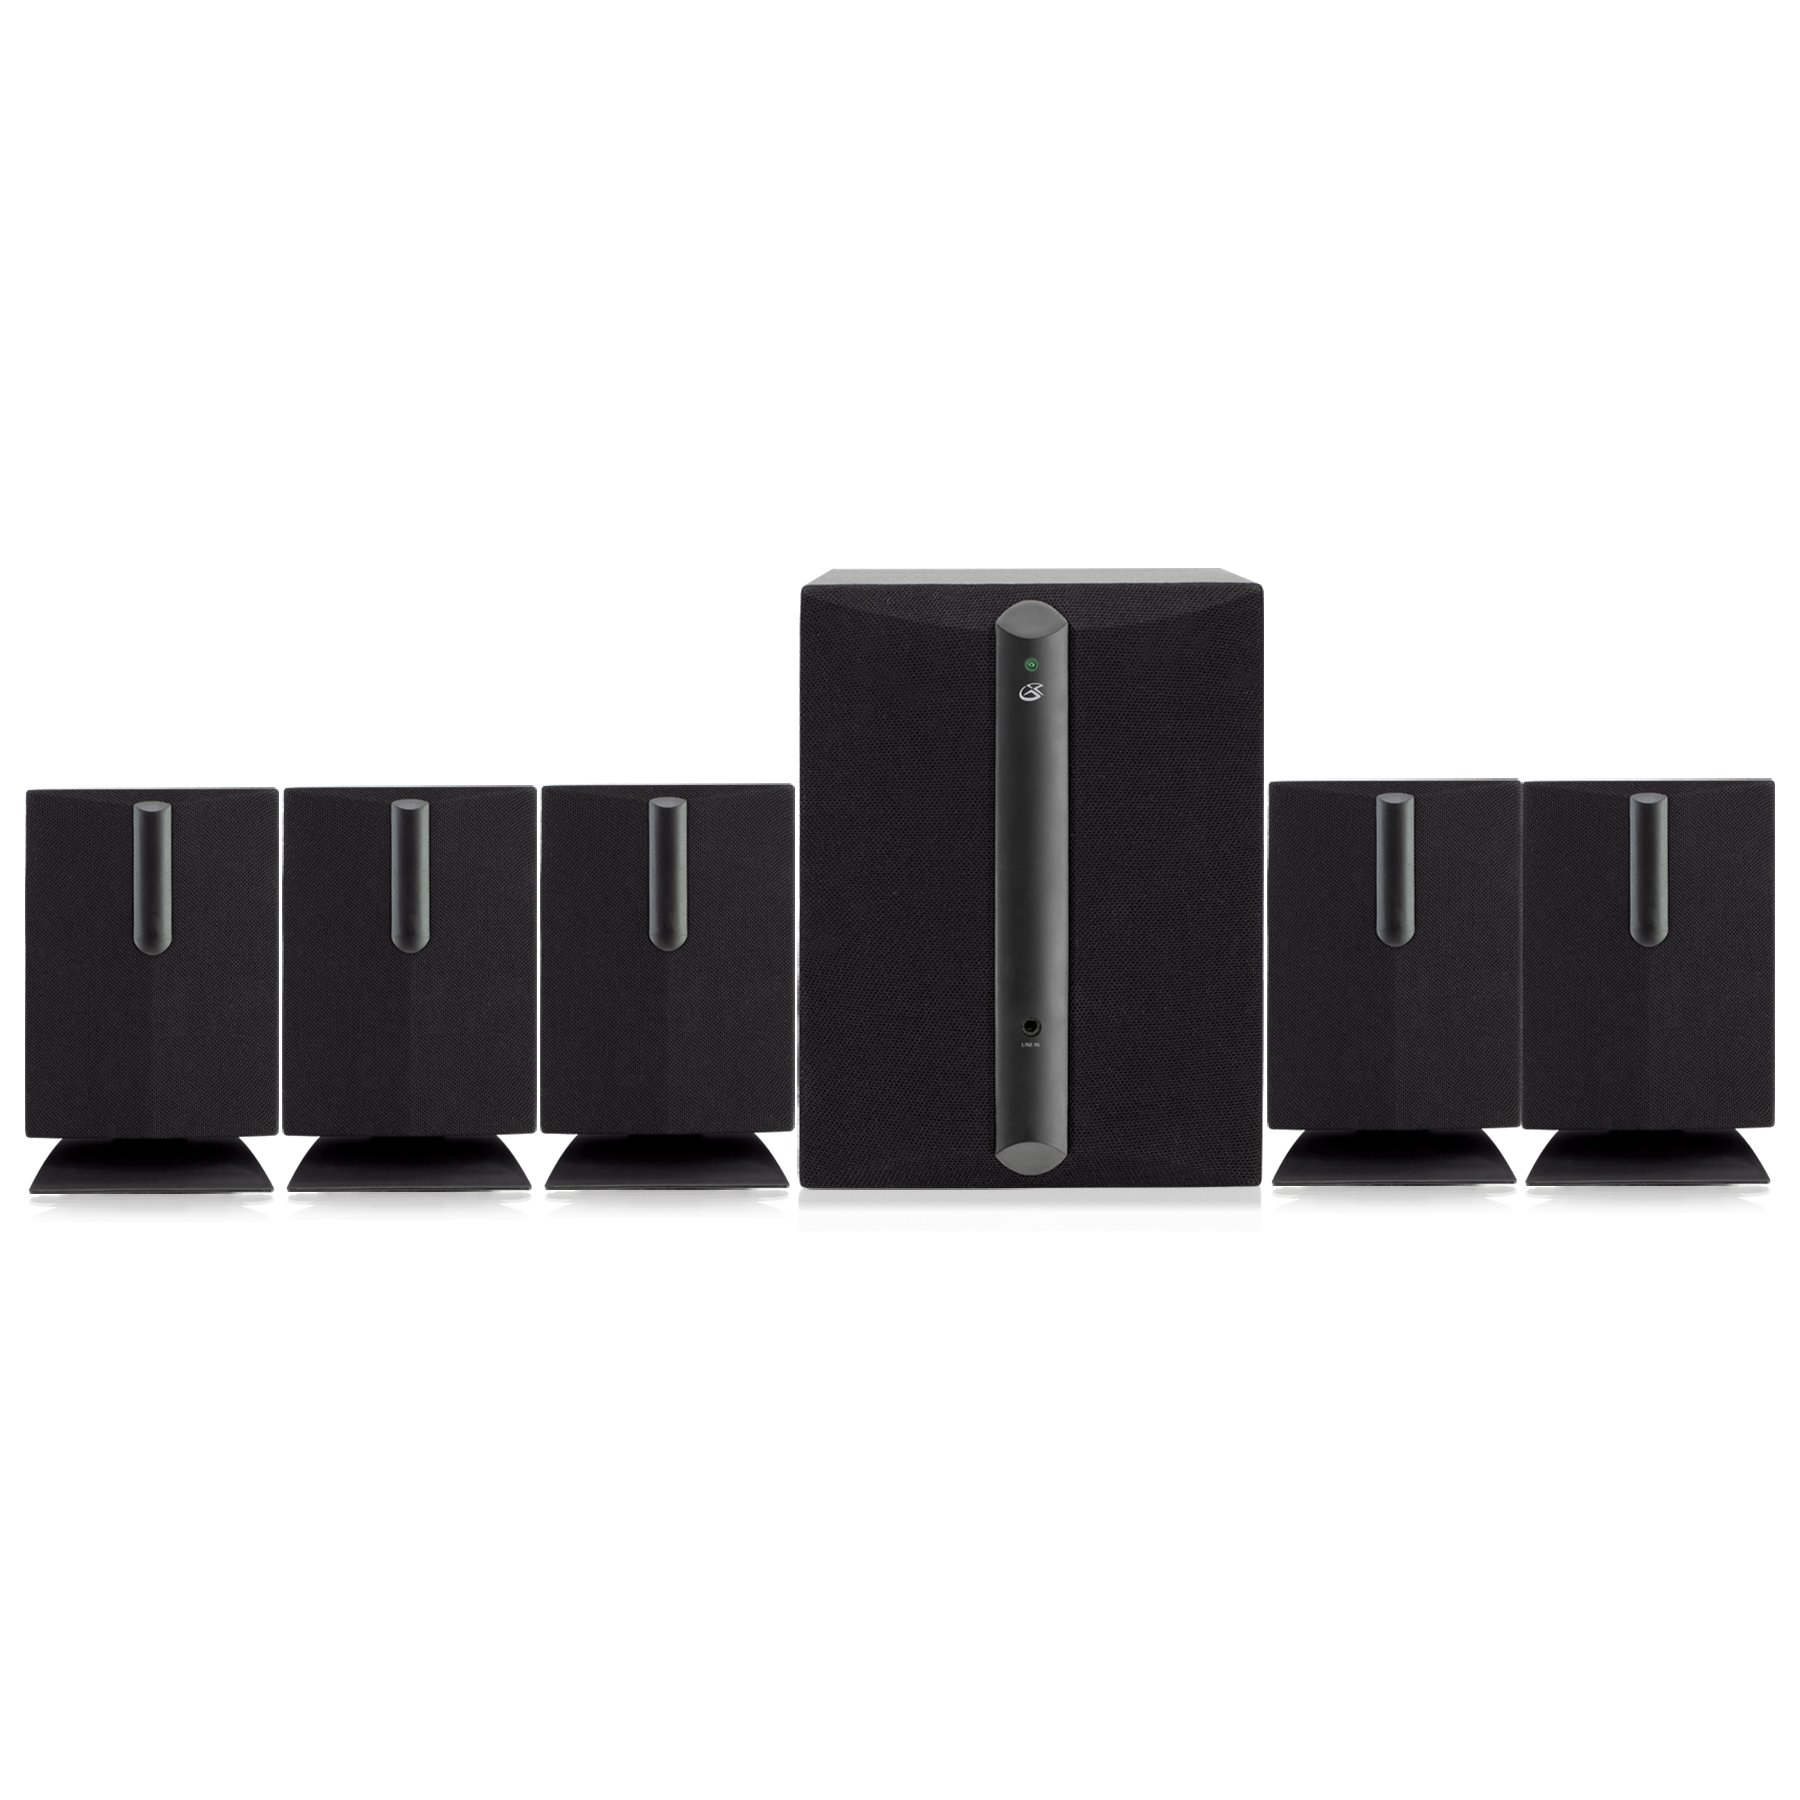 GPX HT050B 5.1-Channel Home Theater Speaker System - image 2 of 3